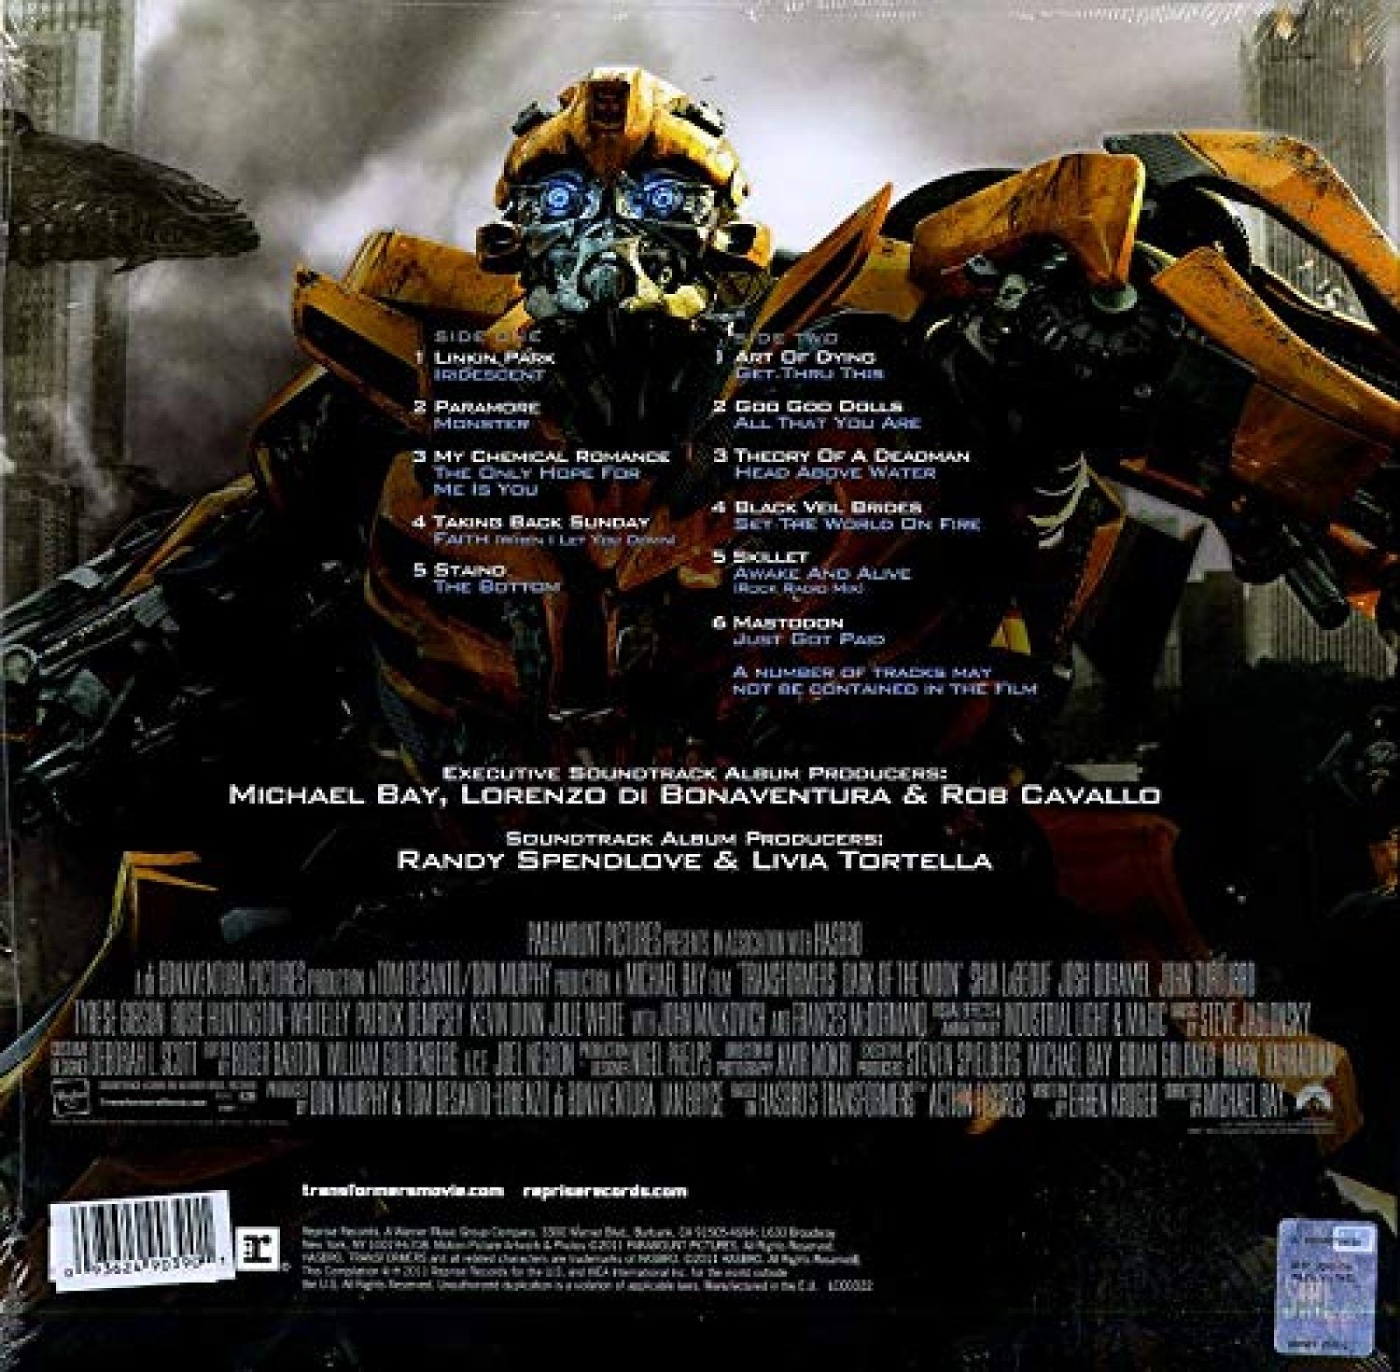 Ost transformers. LP трансформер. OST трансформеры. Виниловая пластинка Transformers. Transformers Dark of the Moon the album.